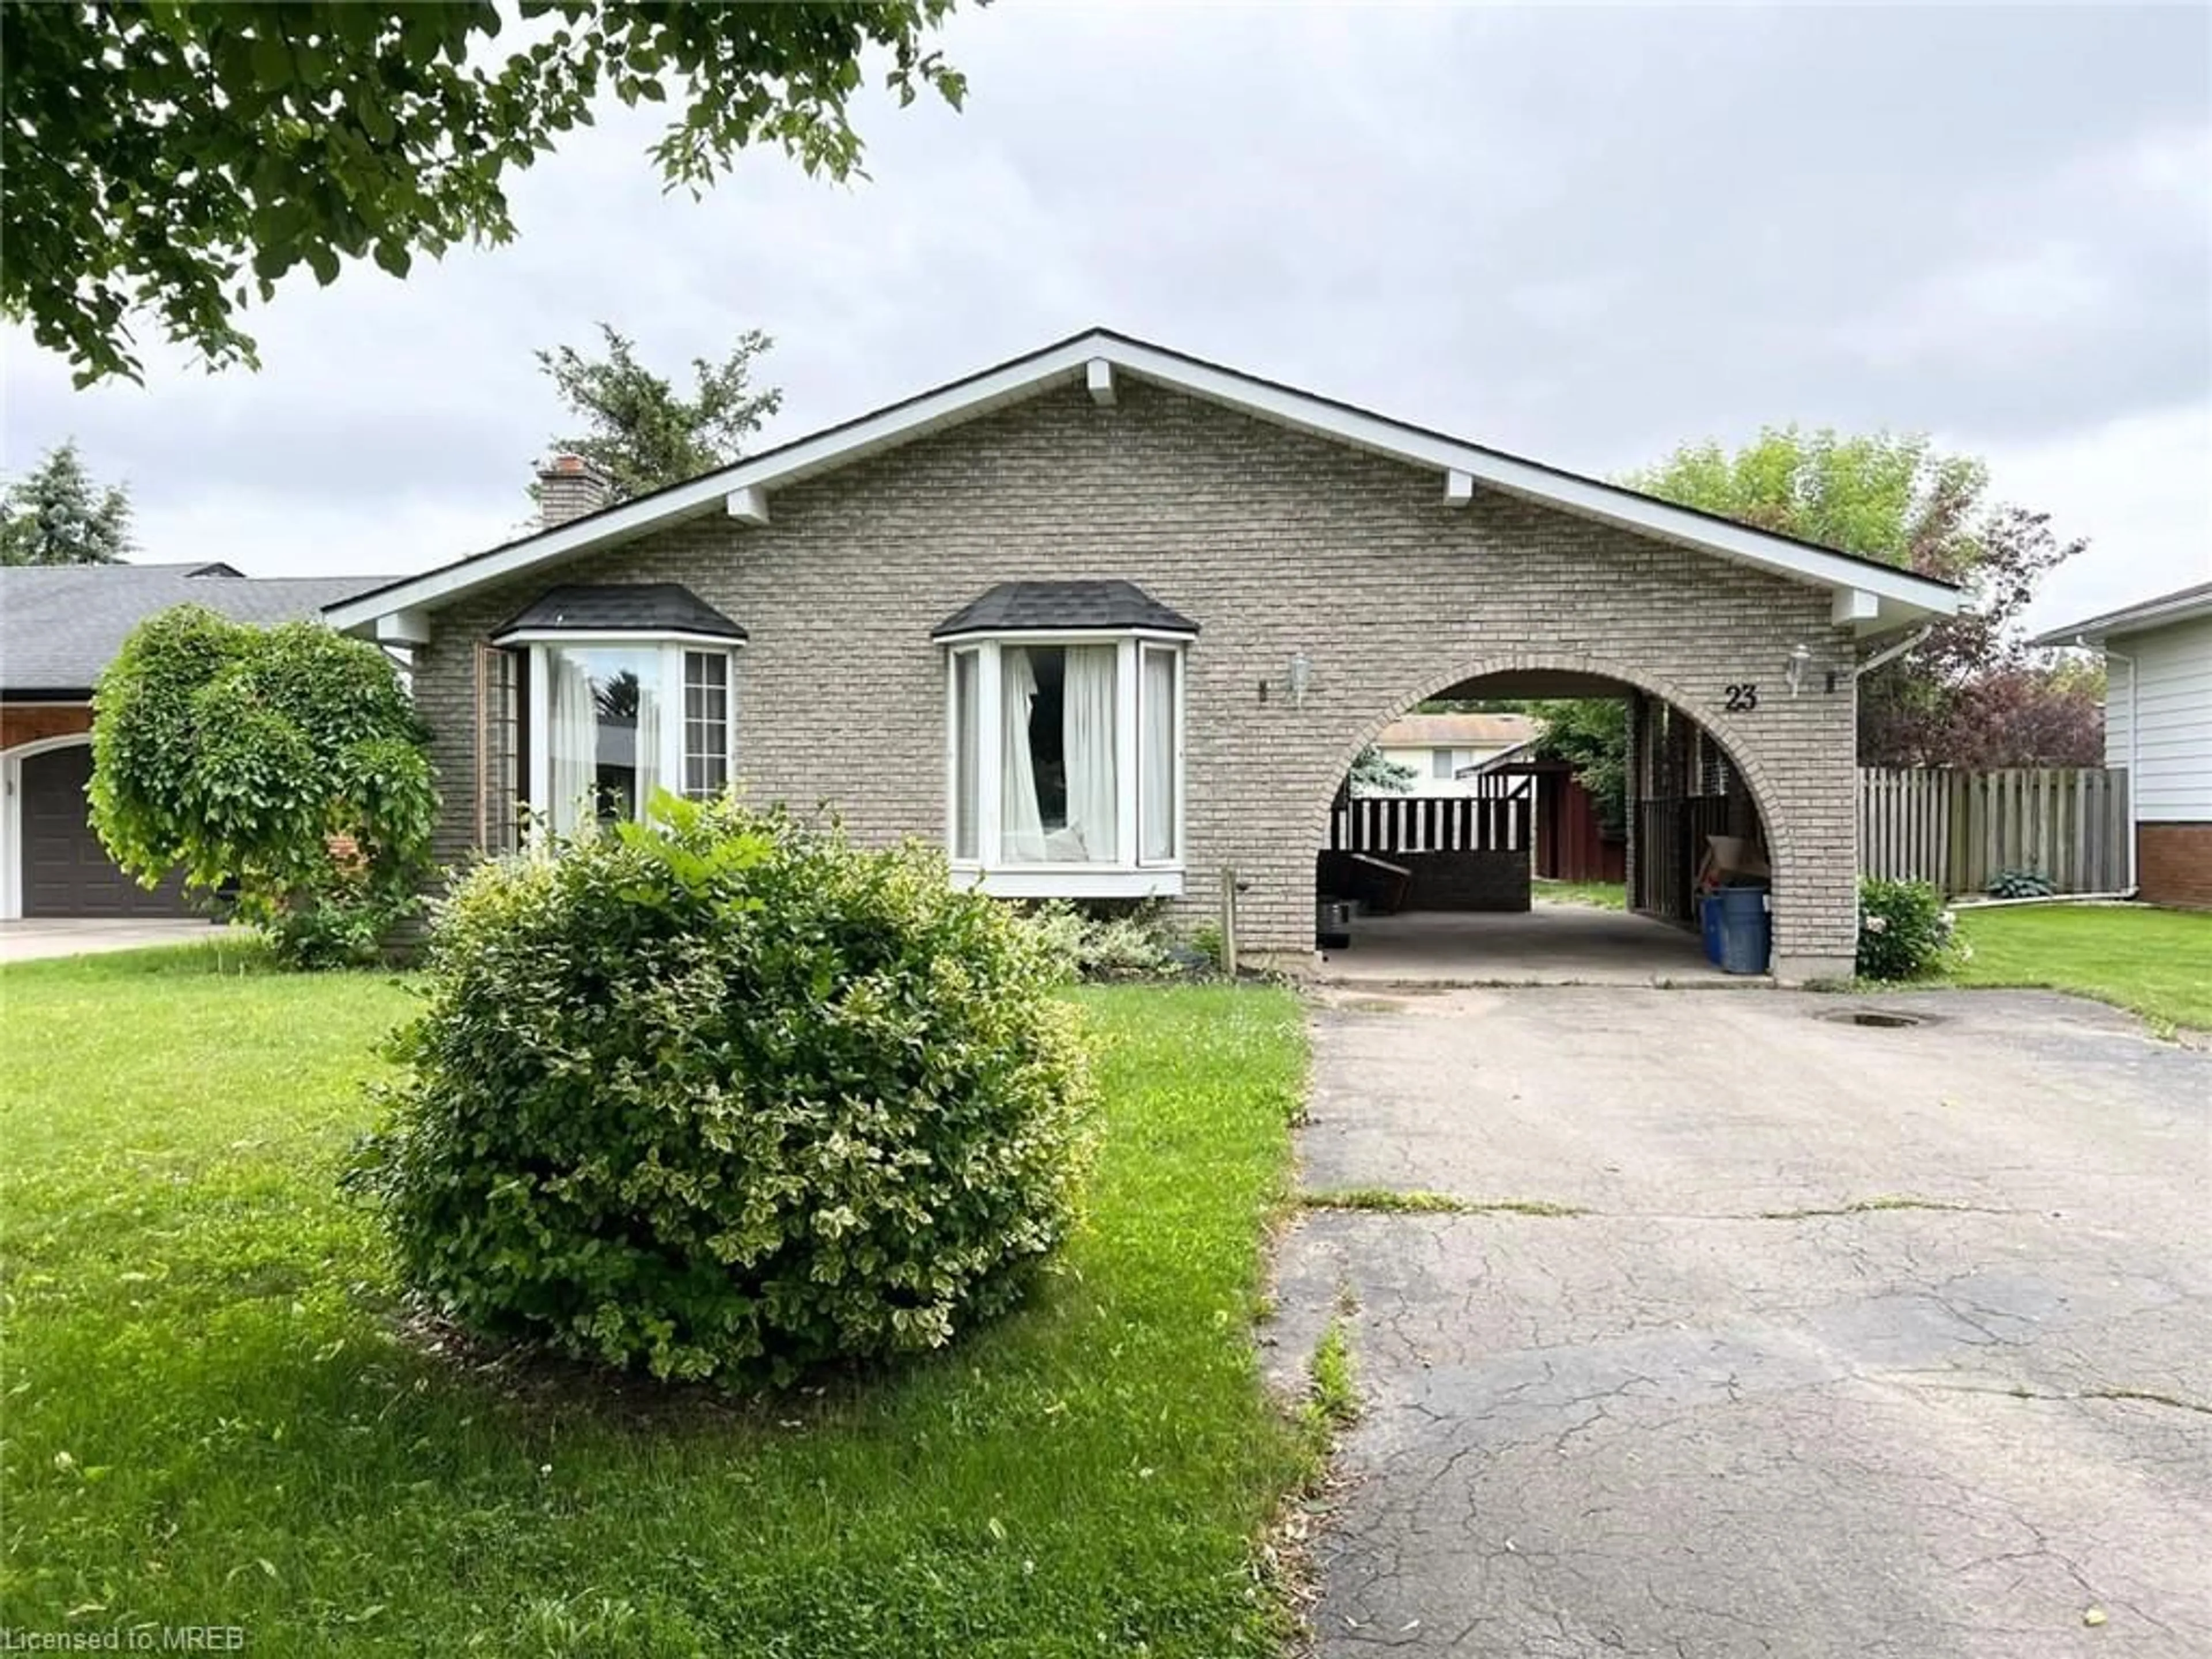 Outside view for 23 Glenayr Pl, Welland Ontario L3C 3M6